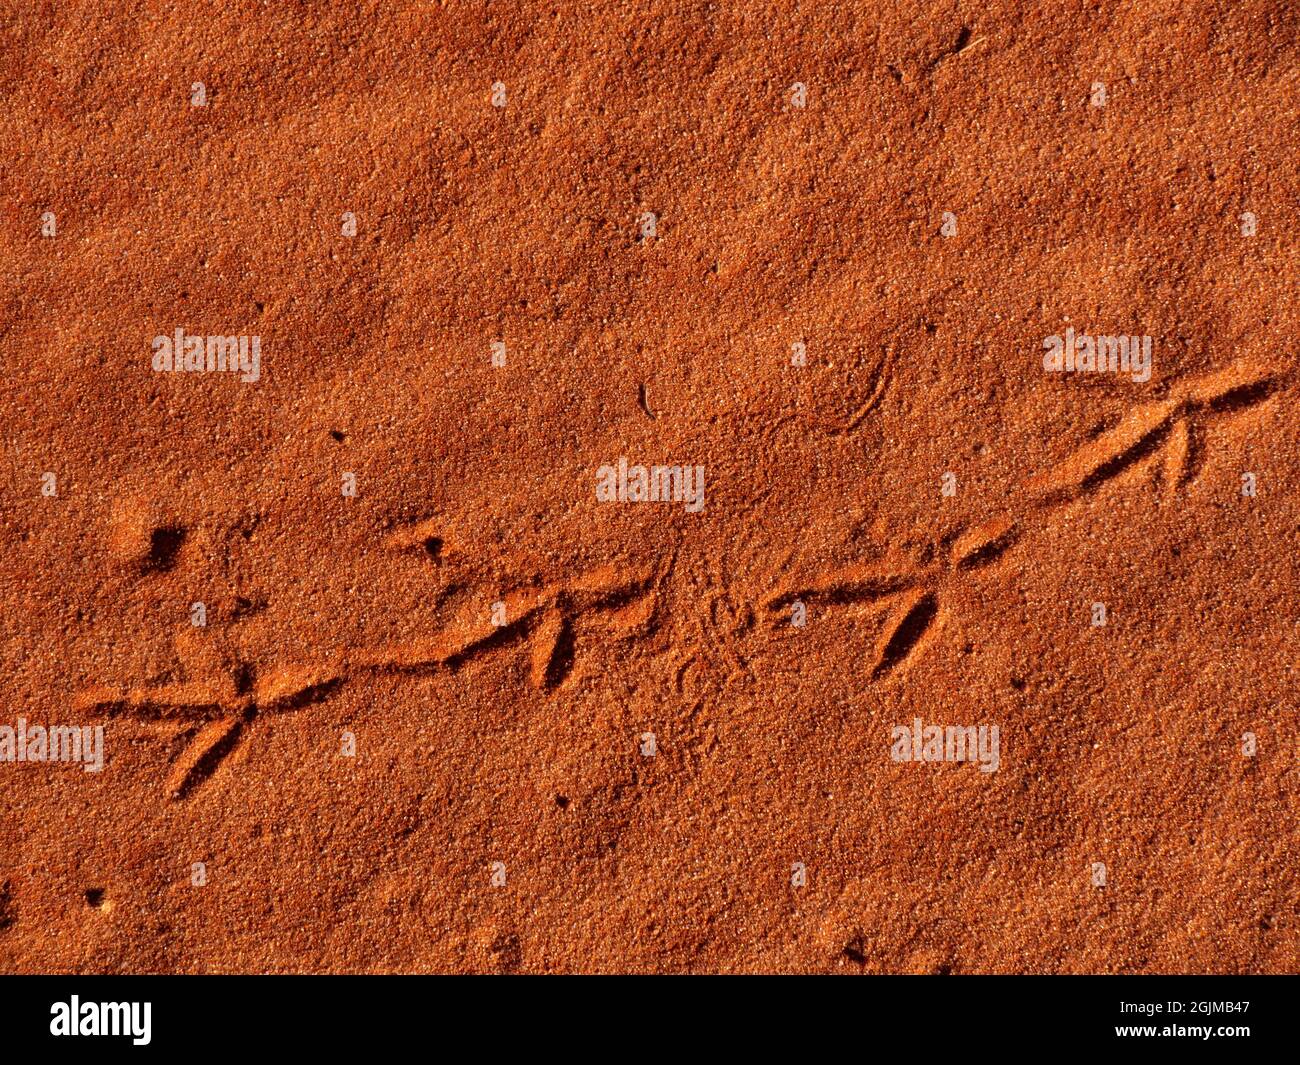 Bird tracks in red sand dune Simpson desert country in outback Central Australia Stock Photo